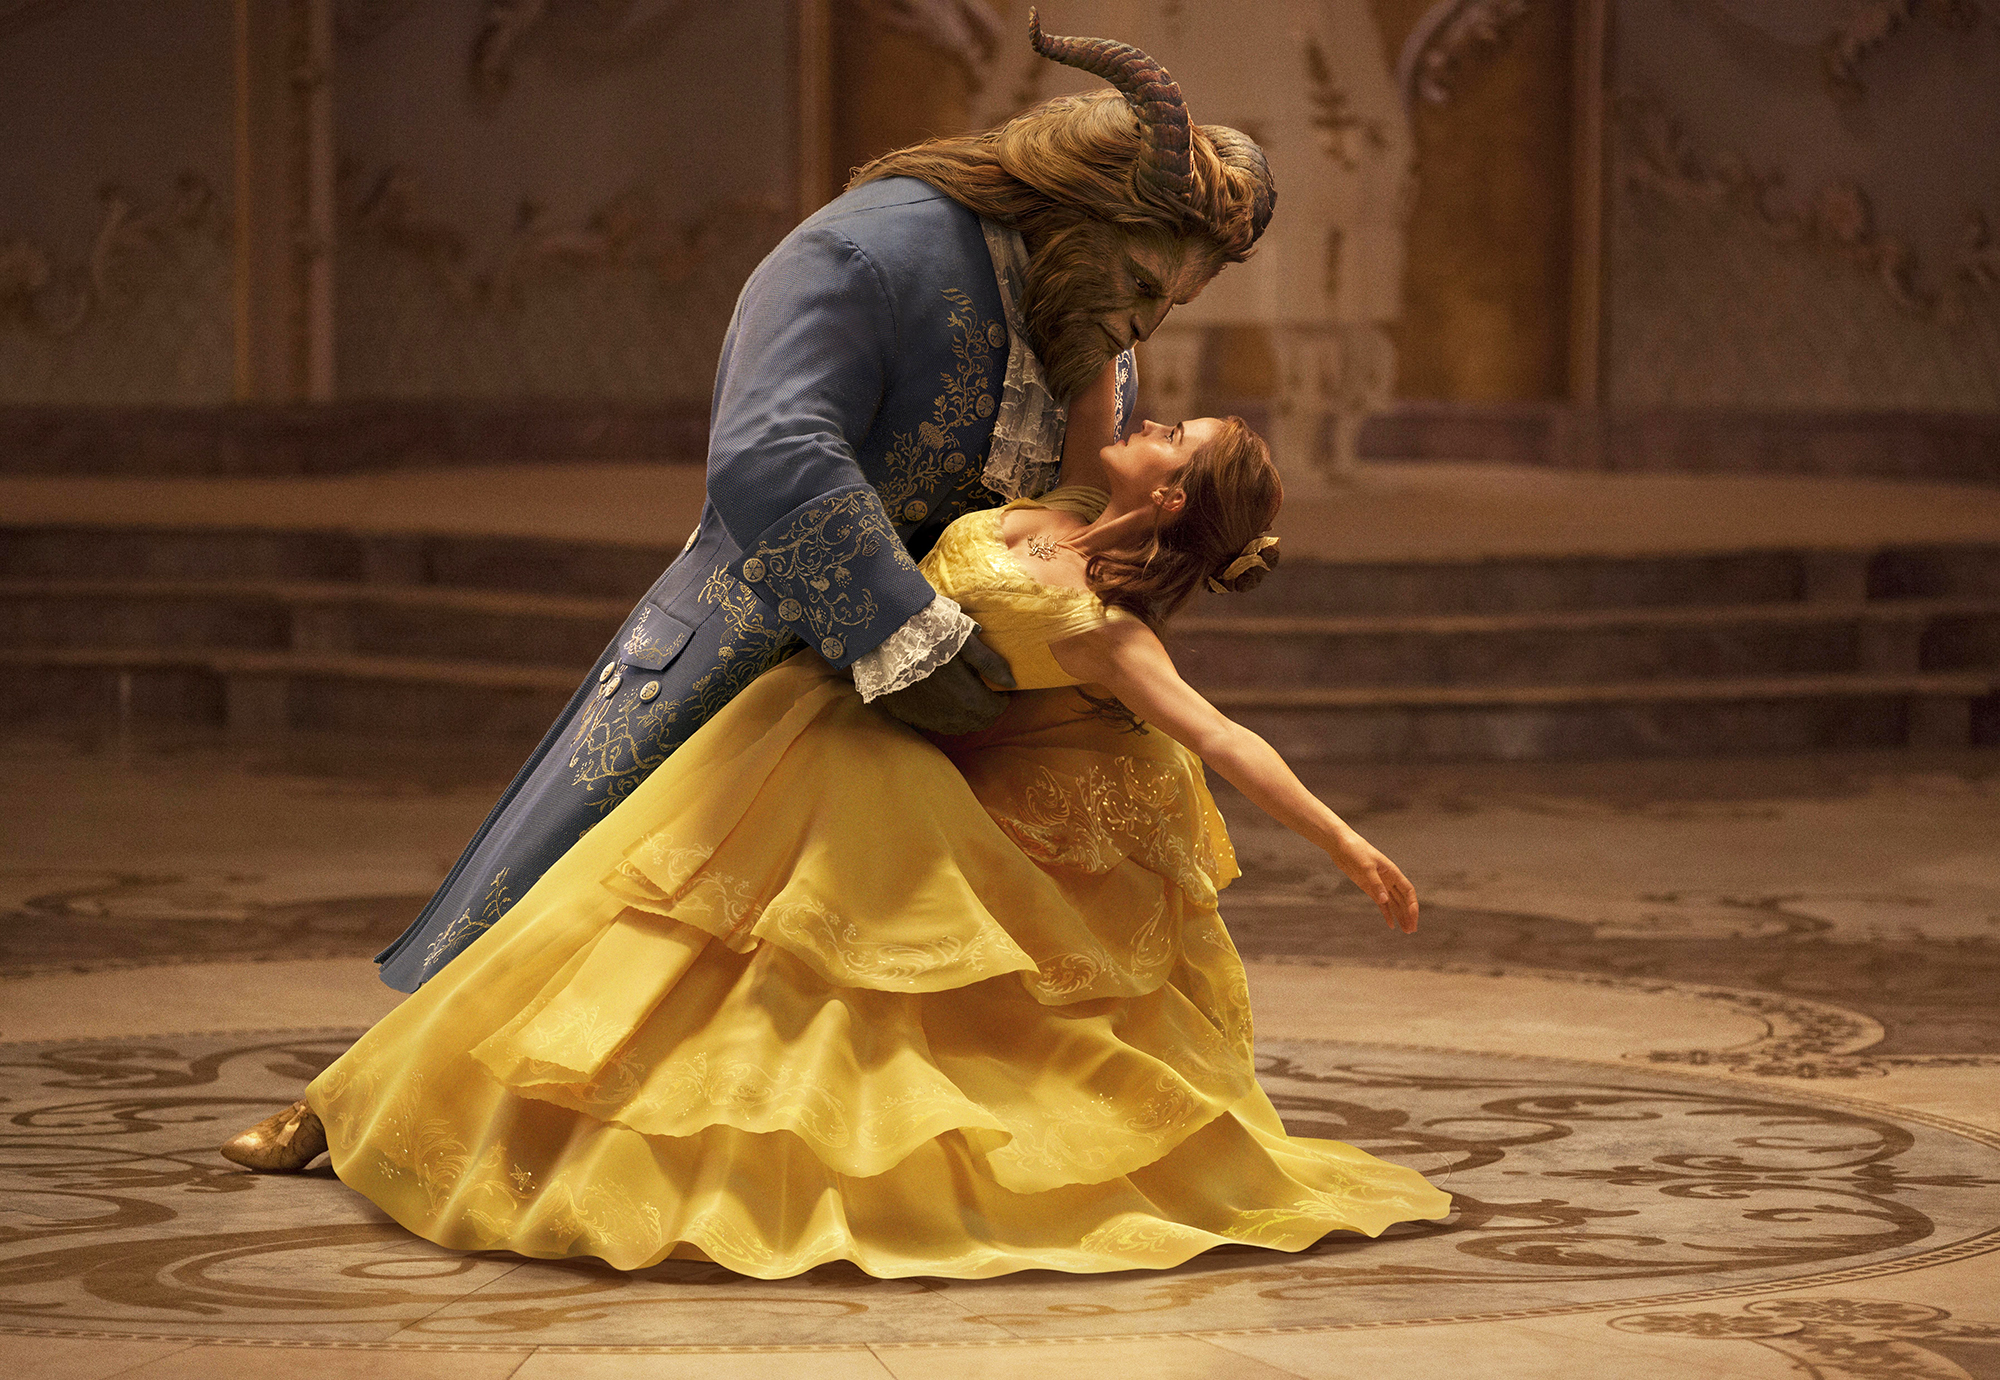 Dan Stevens as The Beast, left, and Emma Watson as Belle in the live-action adaptation of <i>Beauty and the Beast</i>. (Disney/AP)